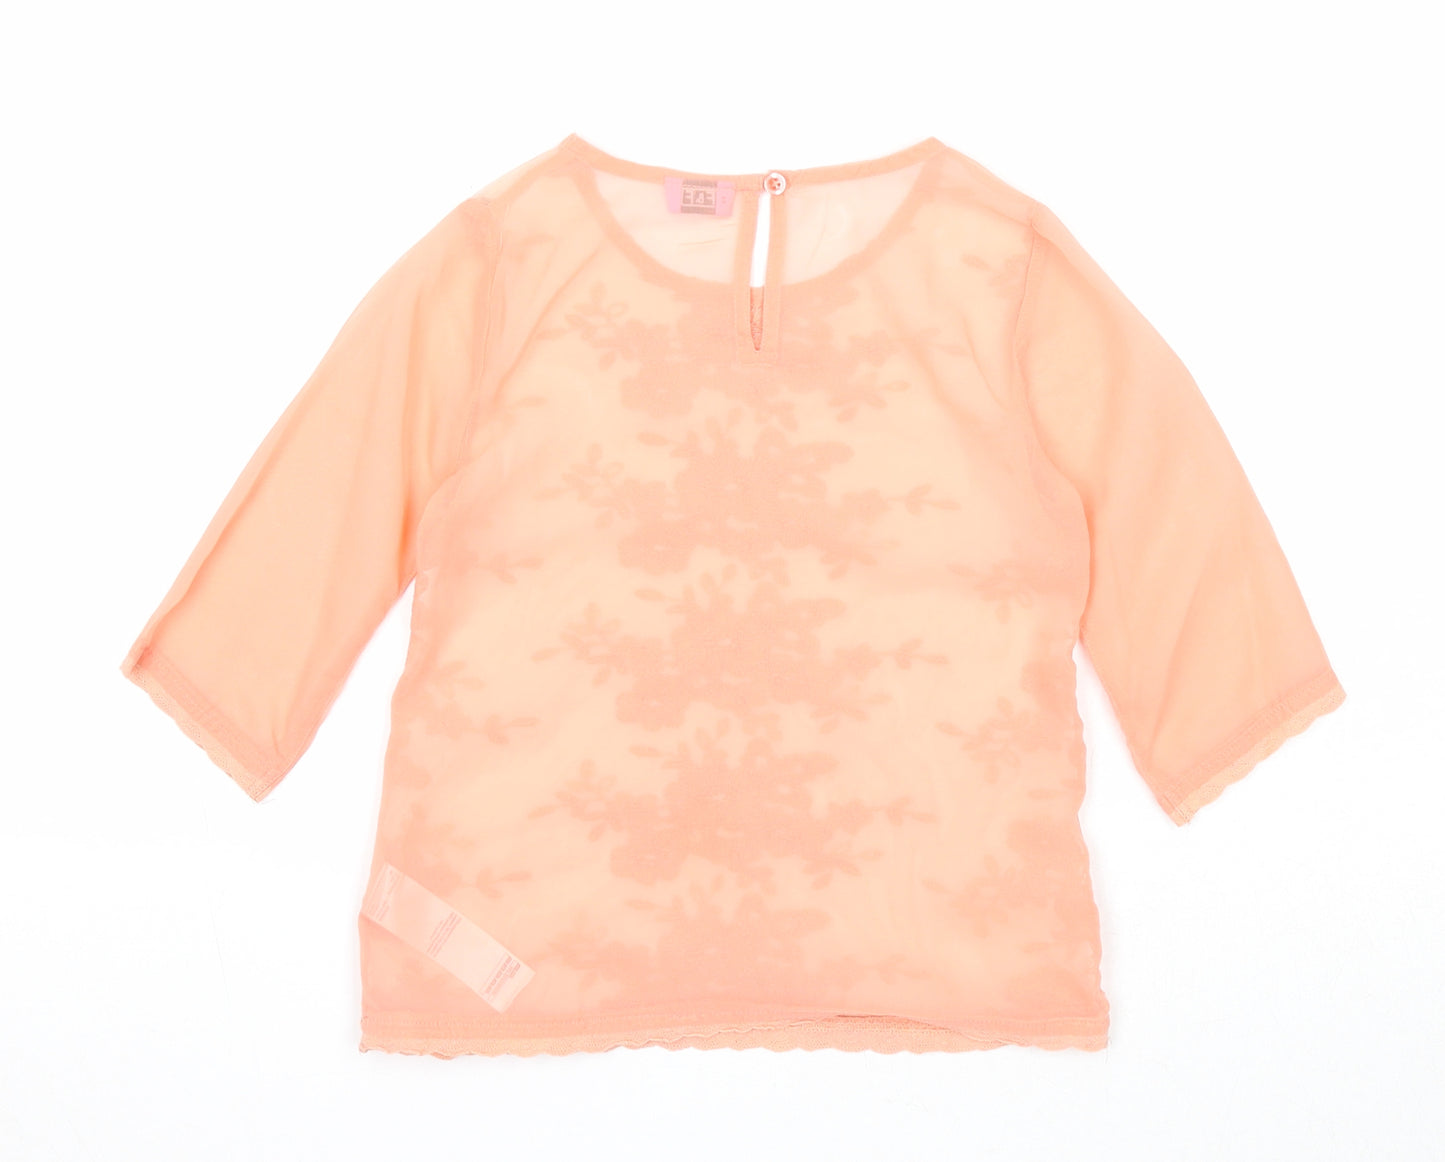 F&F Girls Pink Floral Polyester Basic Blouse Size 5-6 Years Round Neck Button